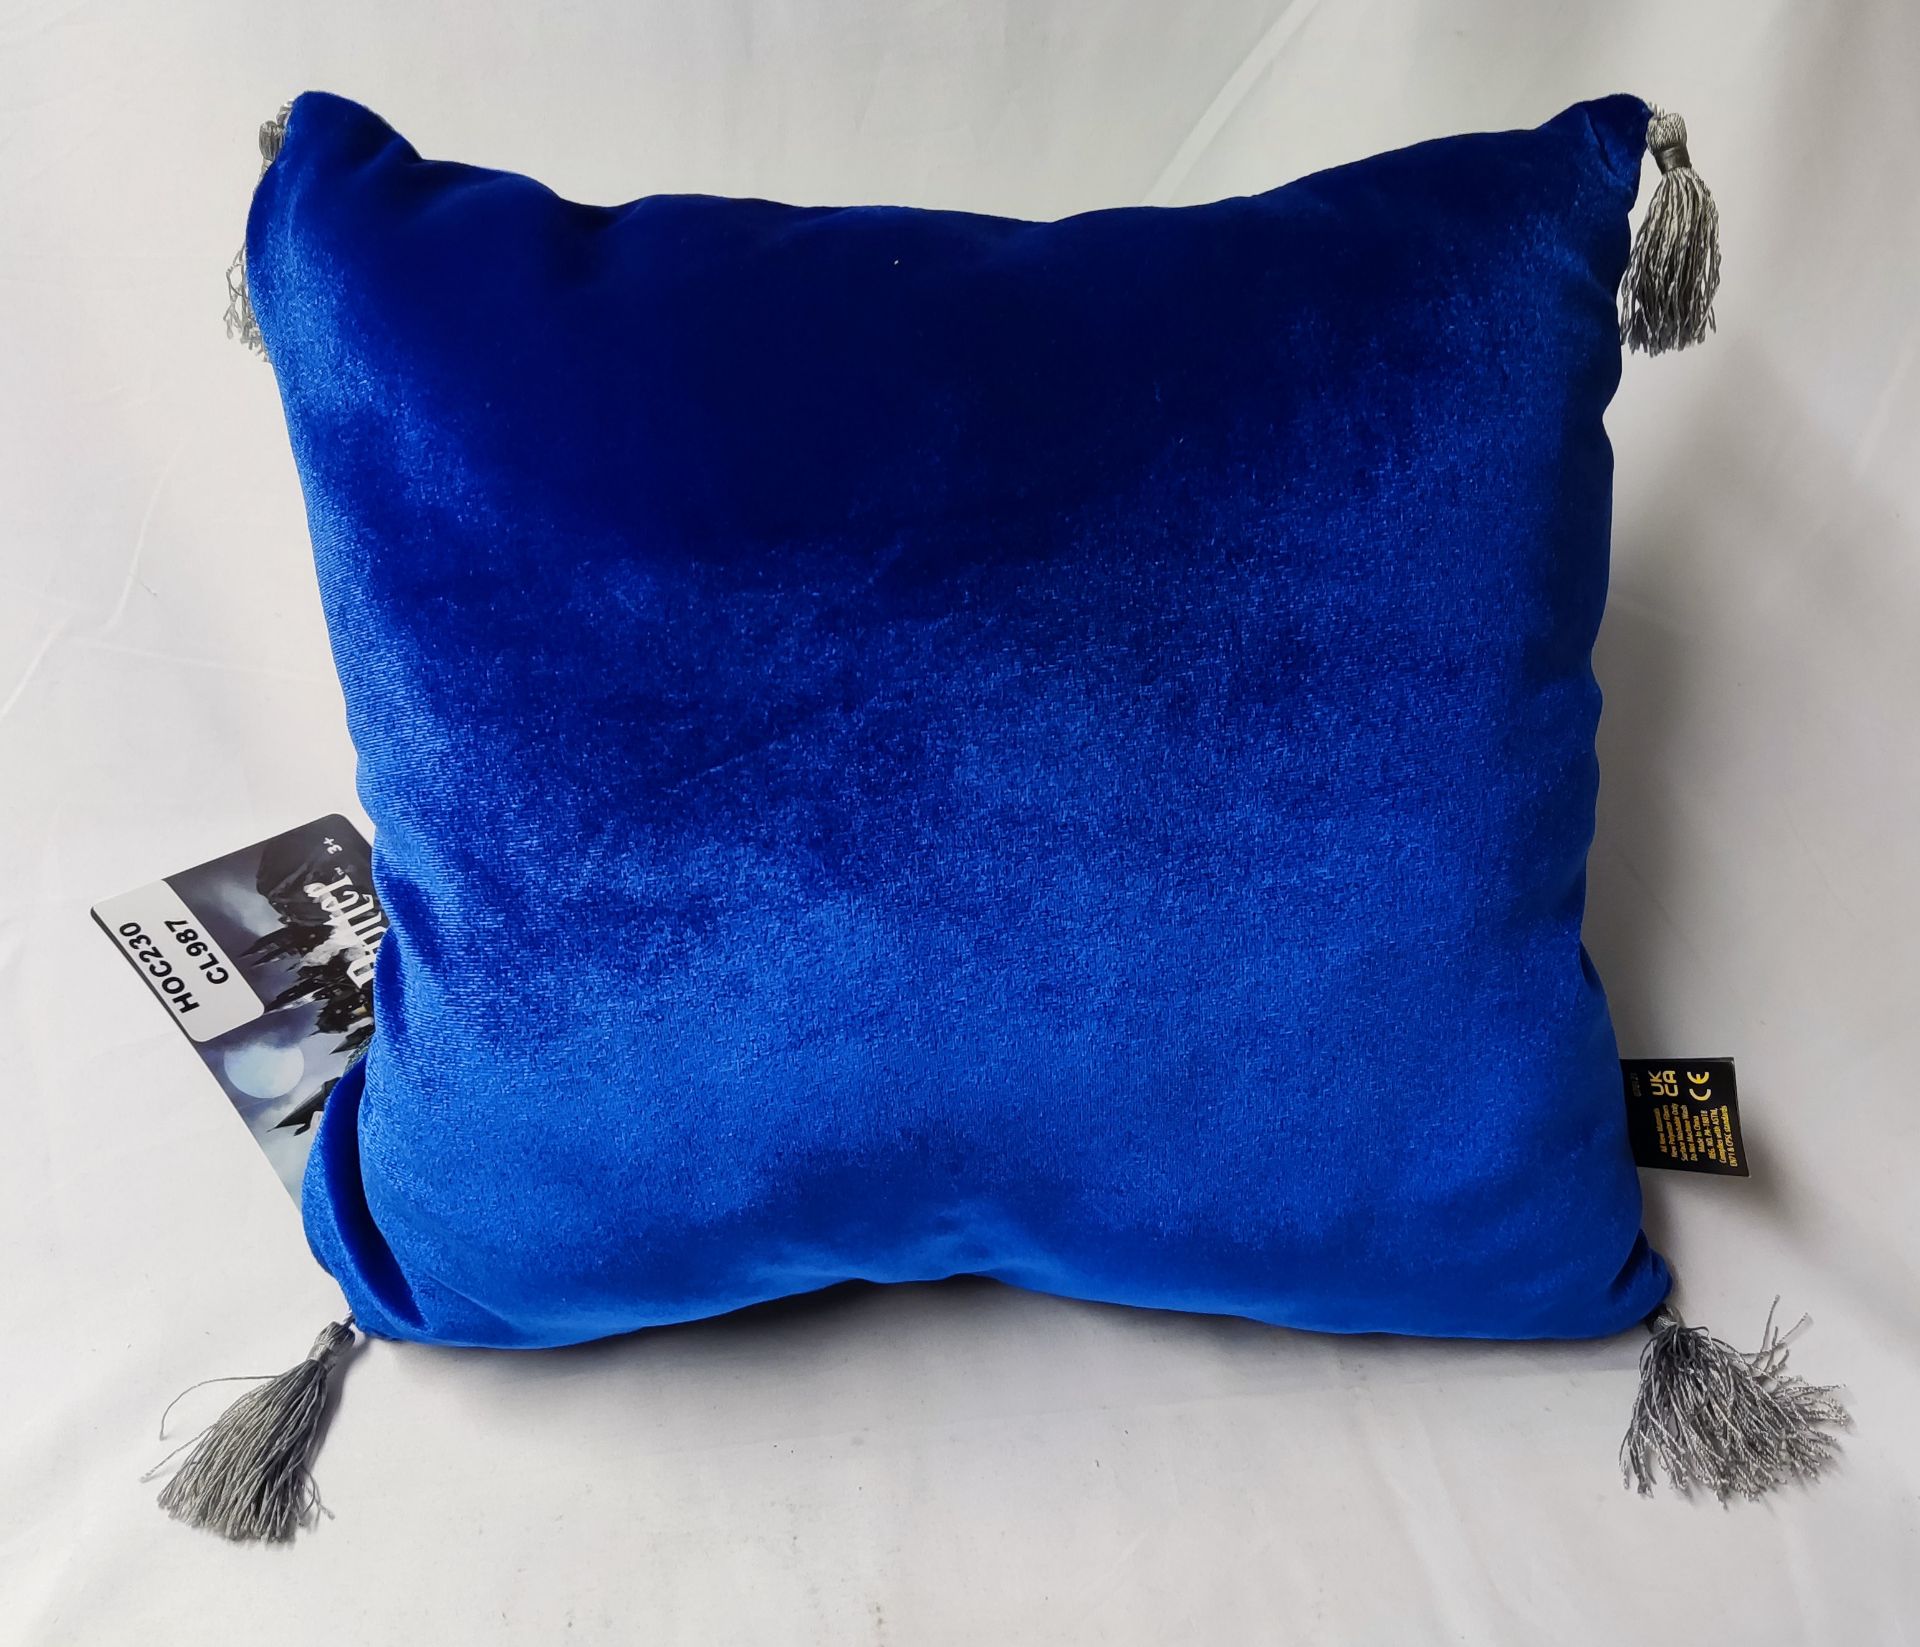 1 x NOBLE COLLECTION Harry Potter Ravenclaw House Mascot Cushion - New/Unused - RRP £39.95 - Ref: / - Image 8 of 11